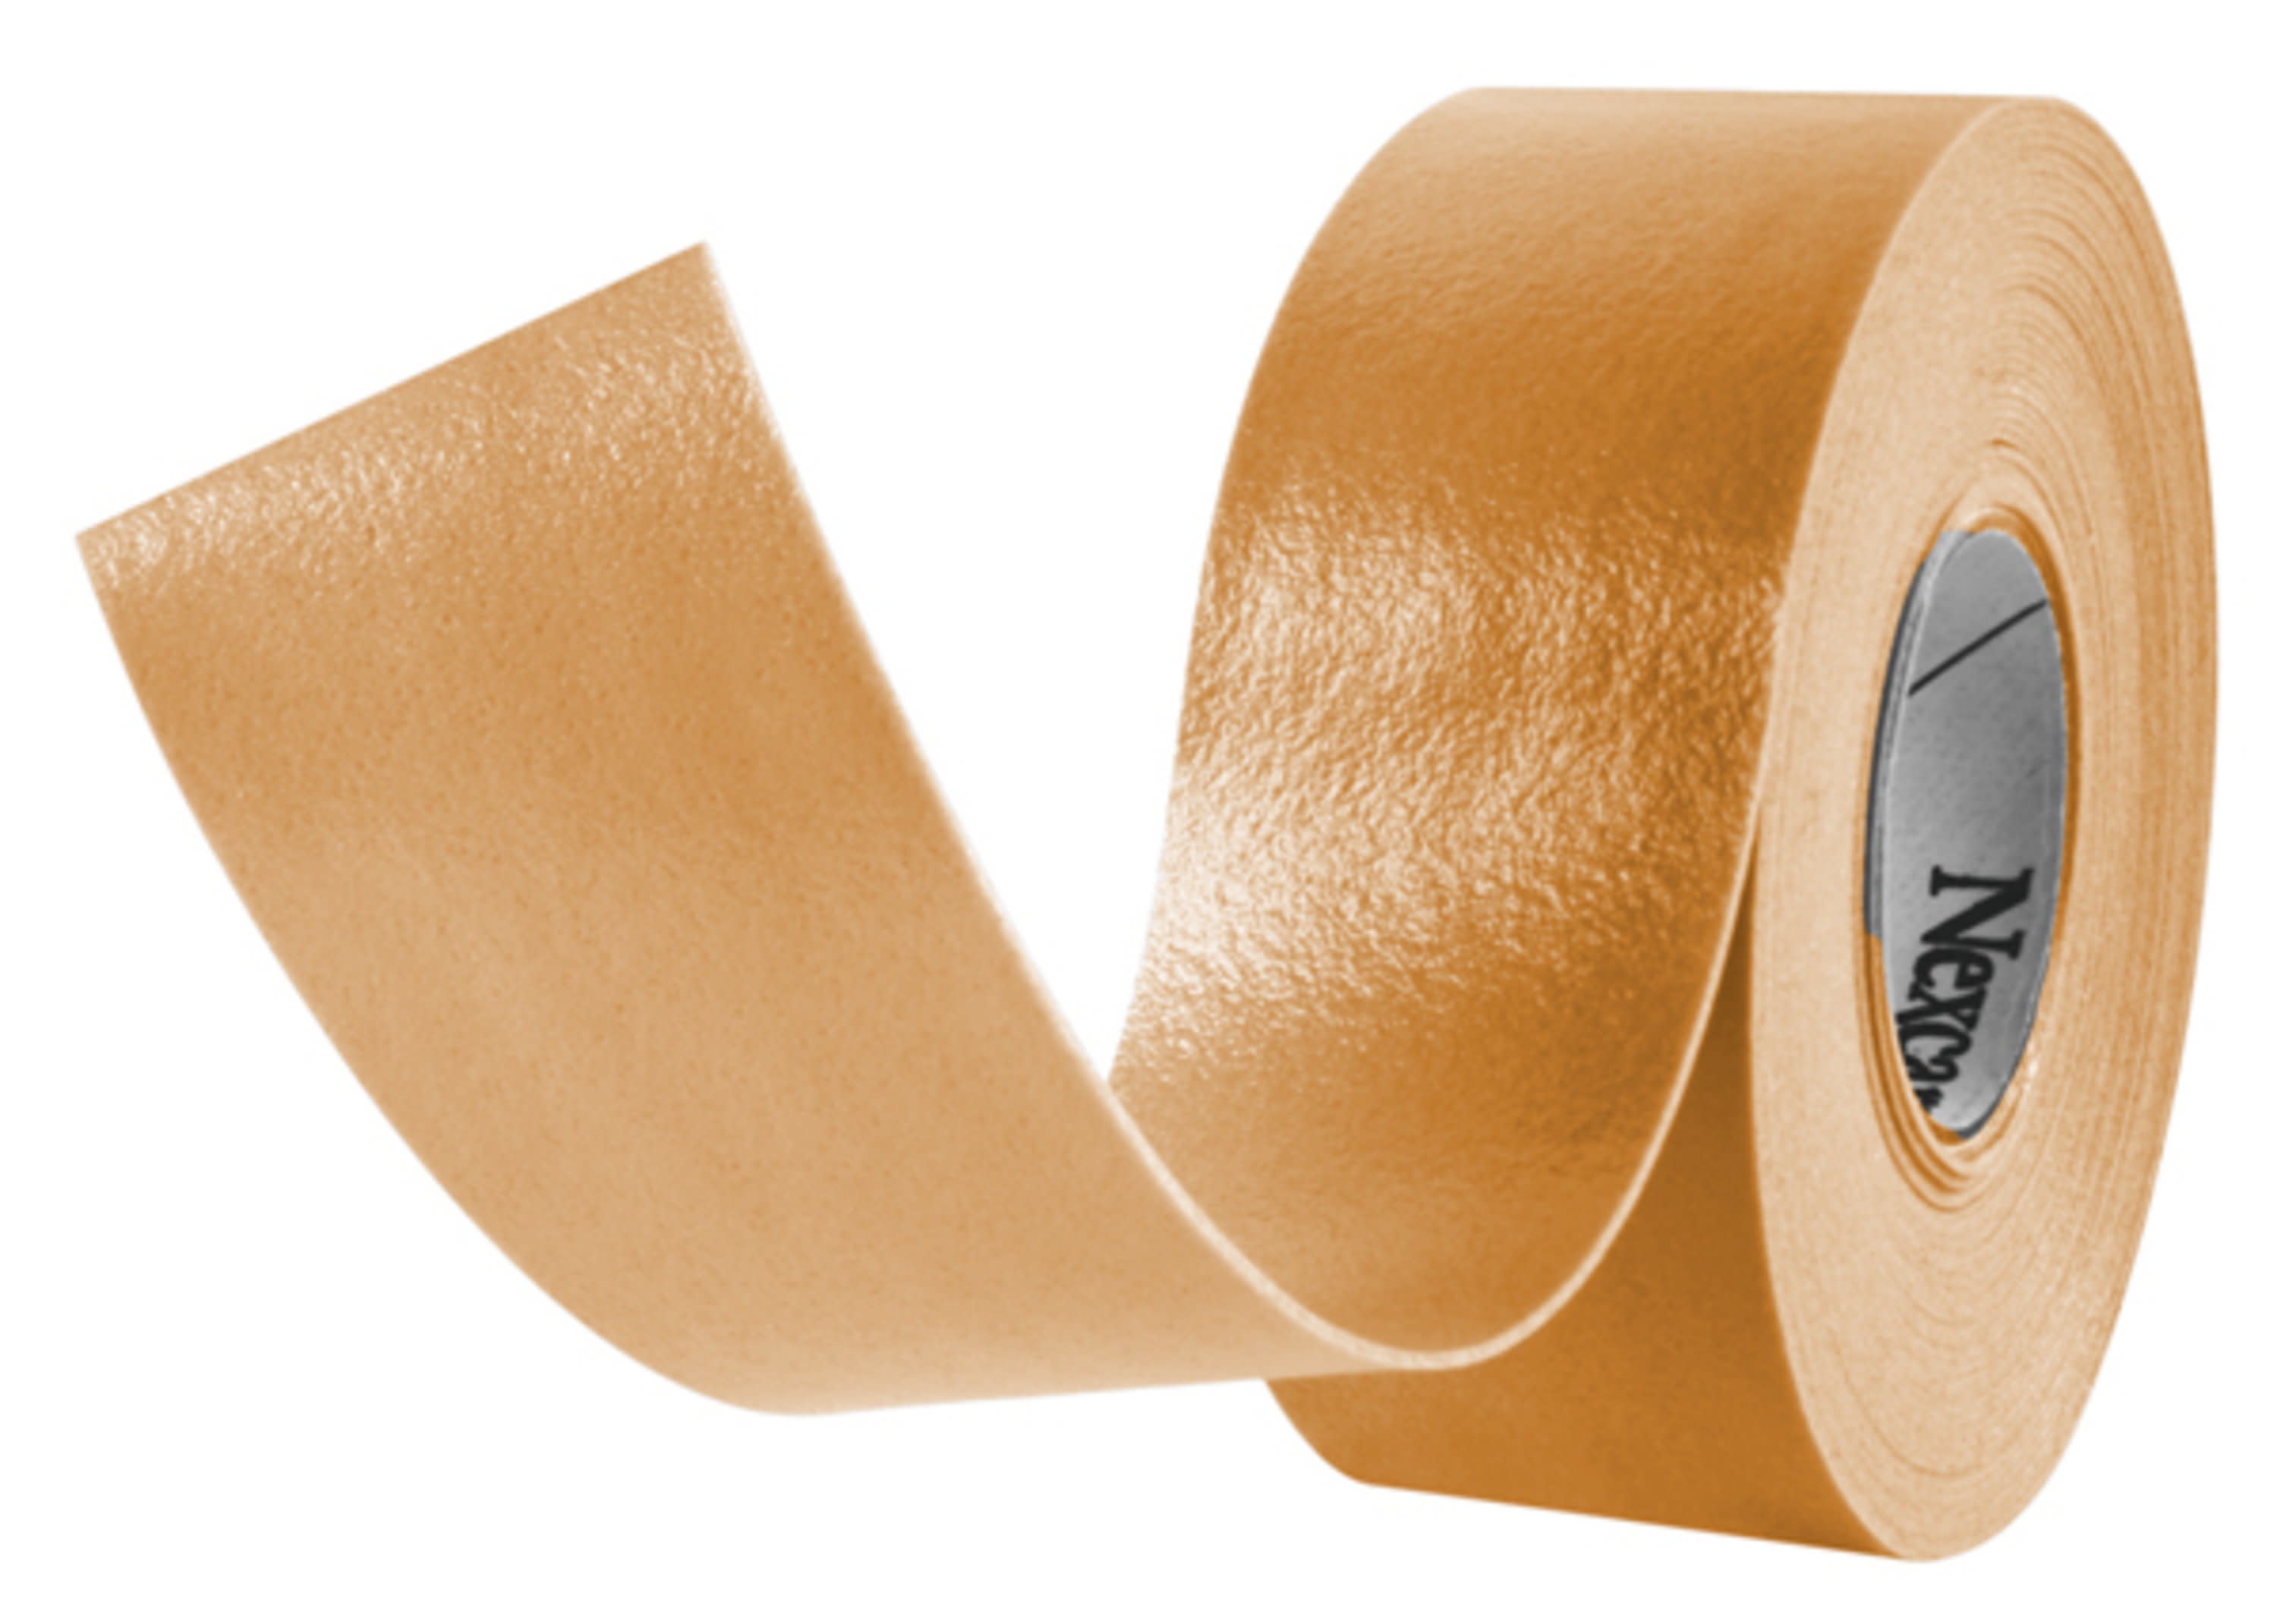 Nexcare Absolute Waterproof First Aid Tape, 1